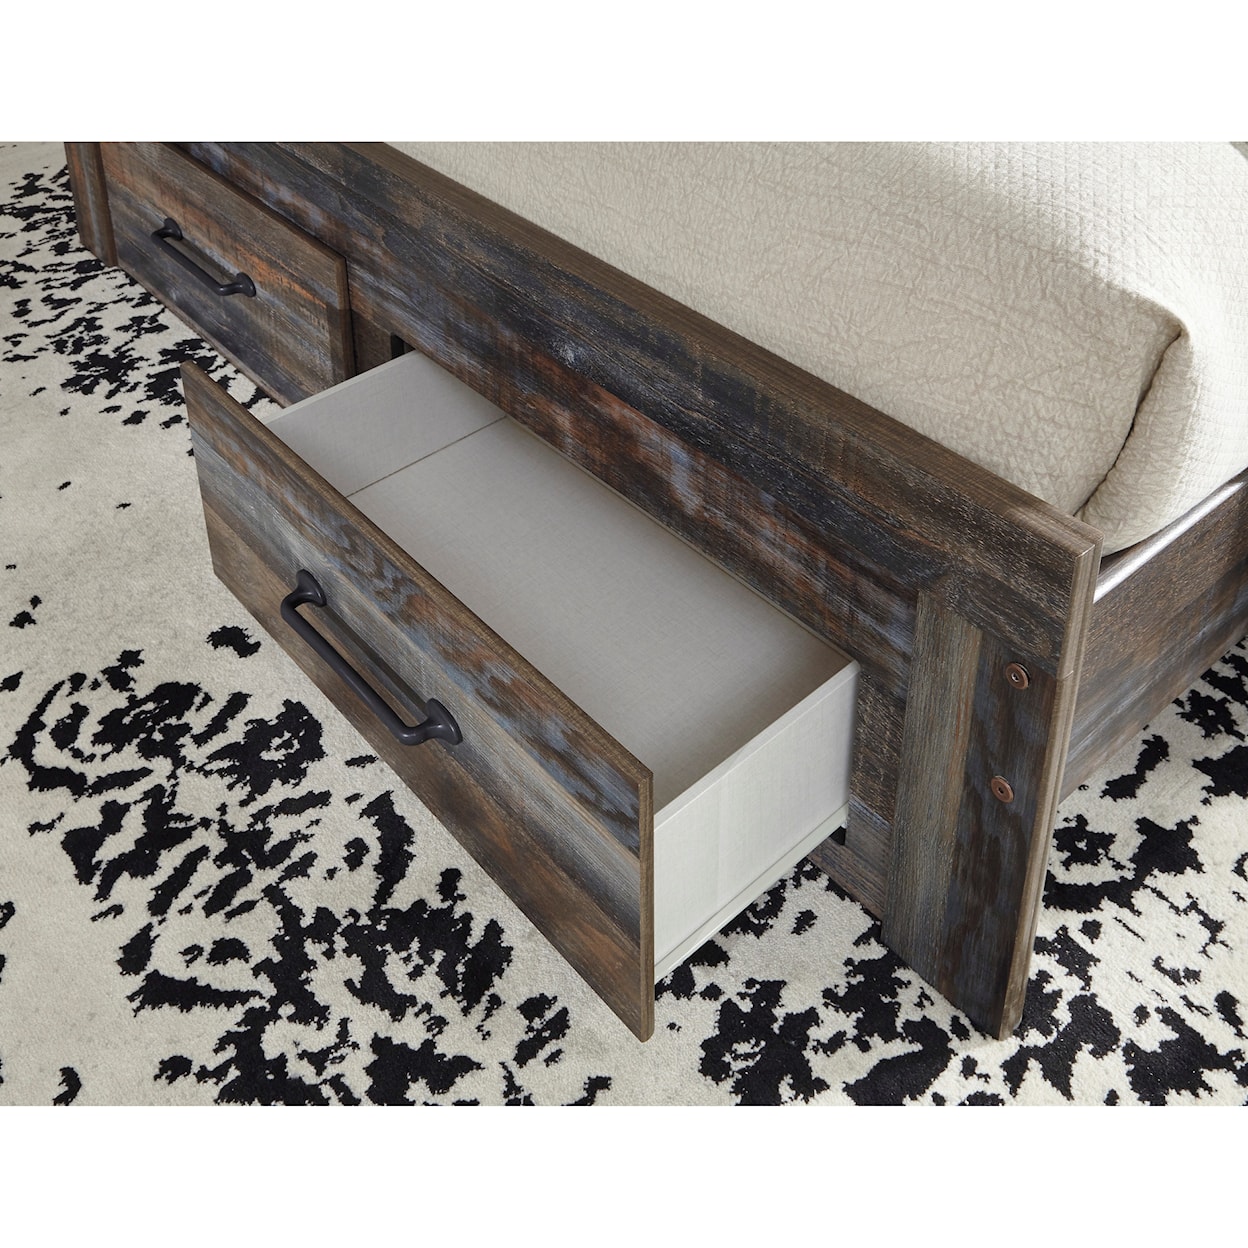 Signature Design by Ashley Baleigh King Panel Bed with Footboard Storage